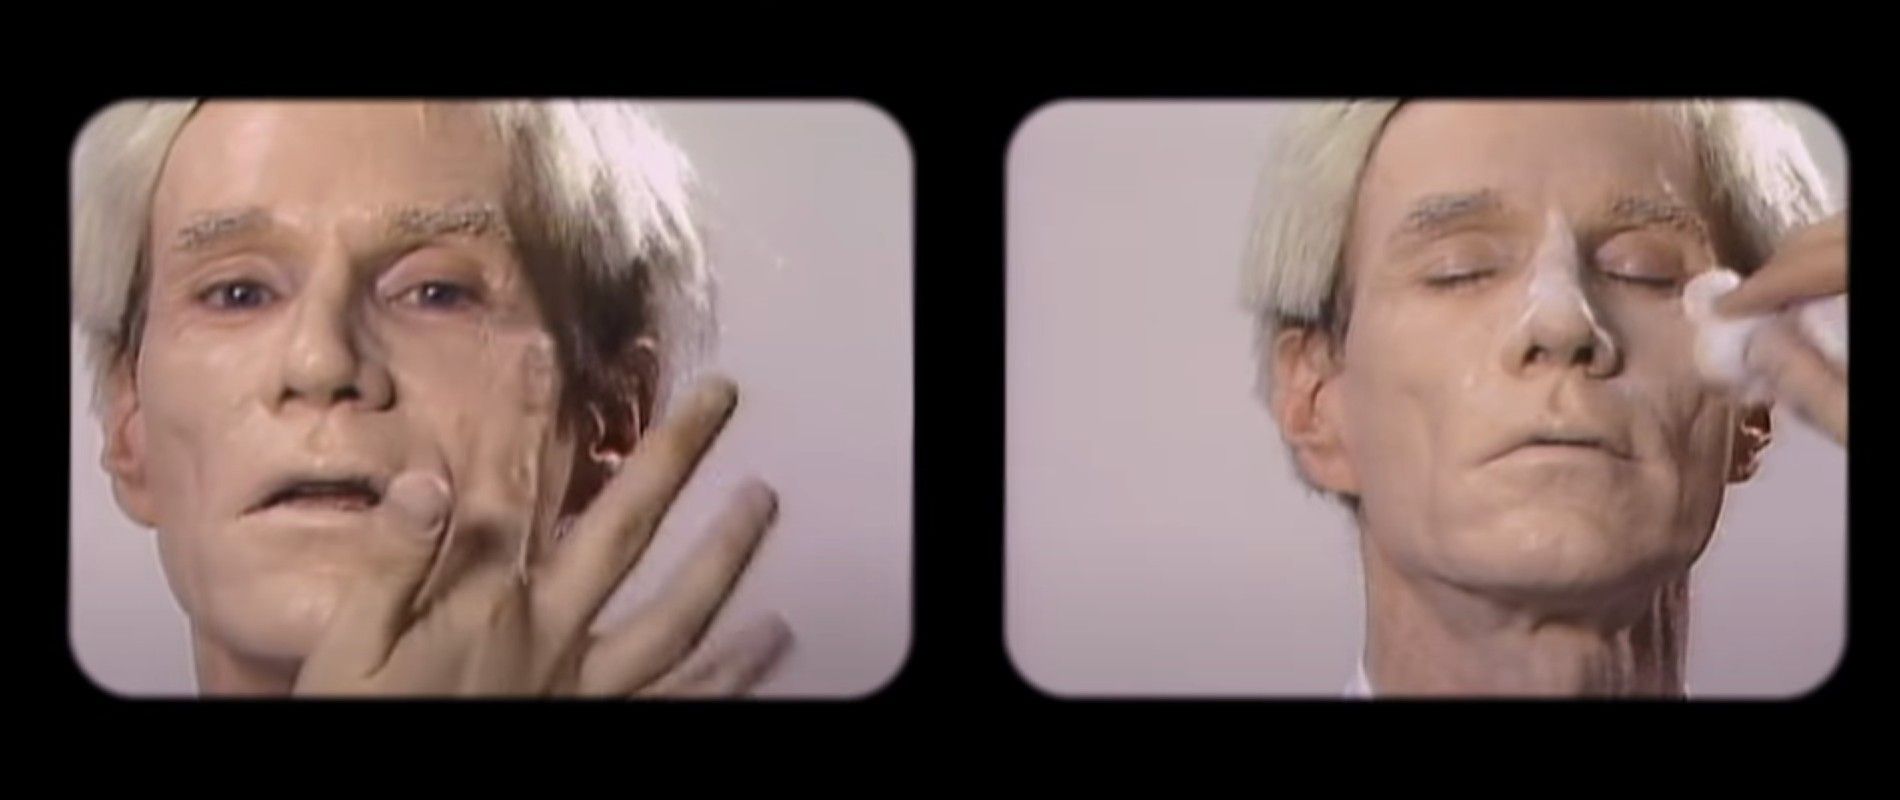 Andy Warhol applying make up in two side-by-side images